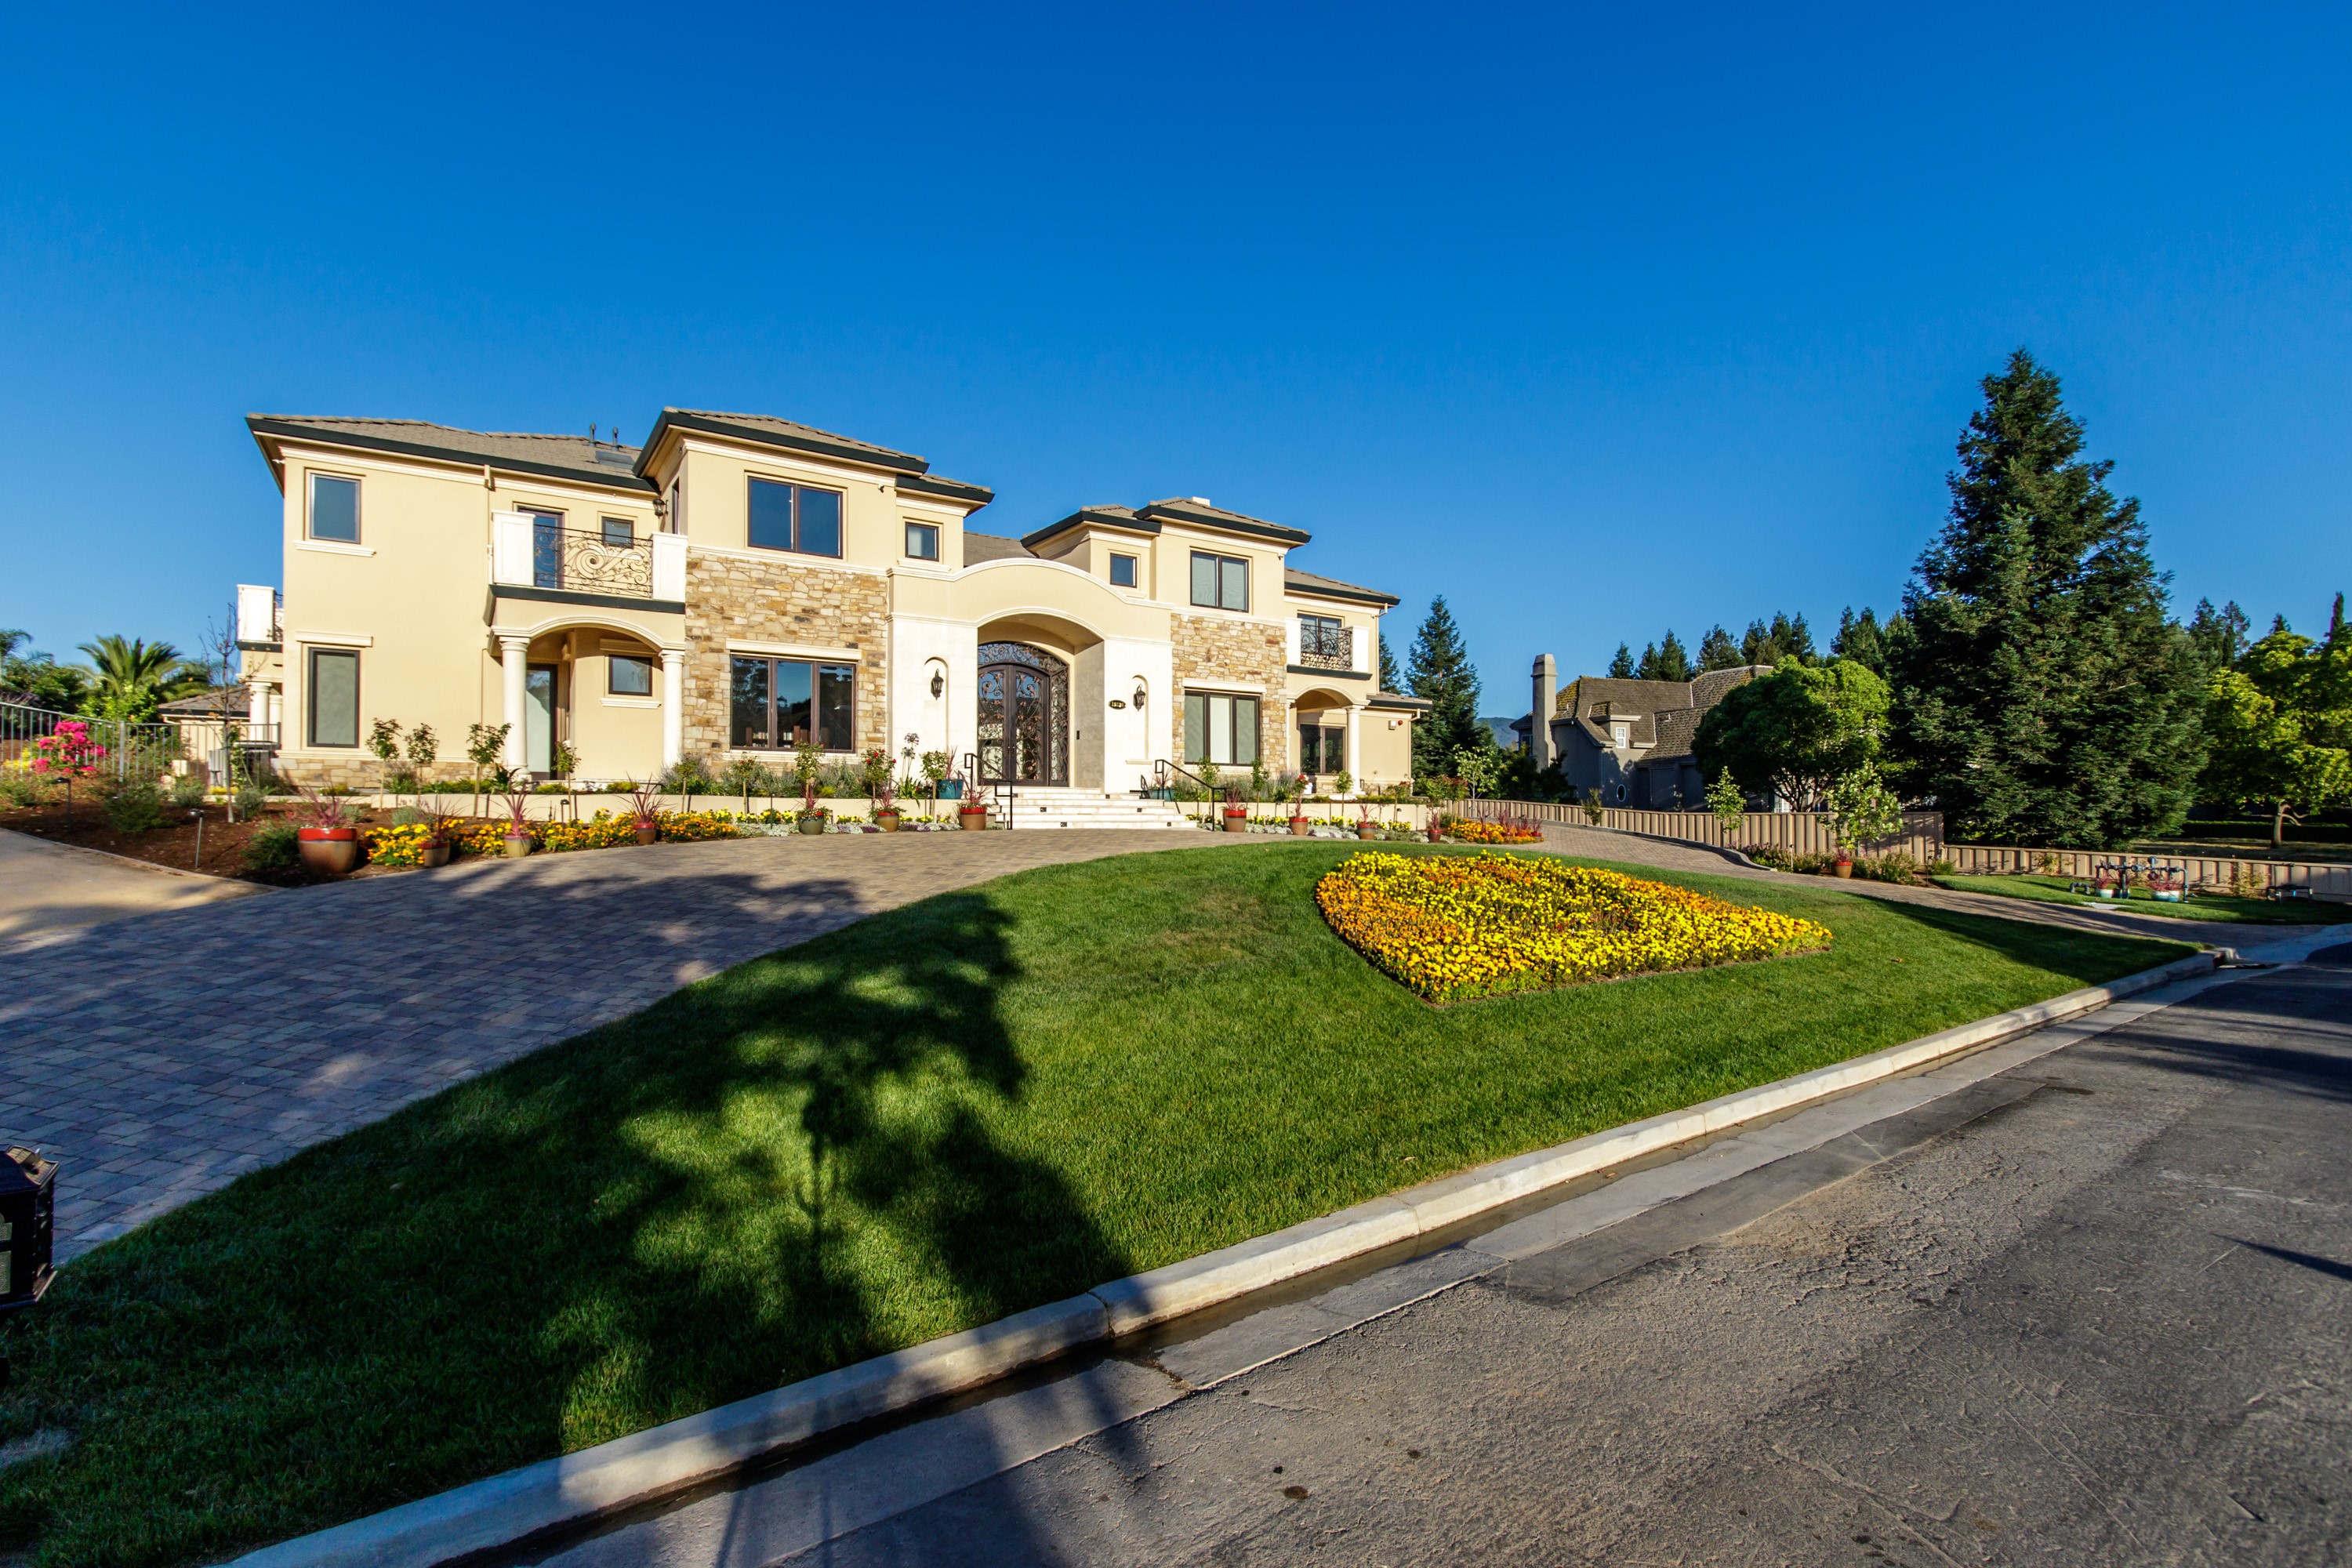 Custom home built by experts in Sunnyvale